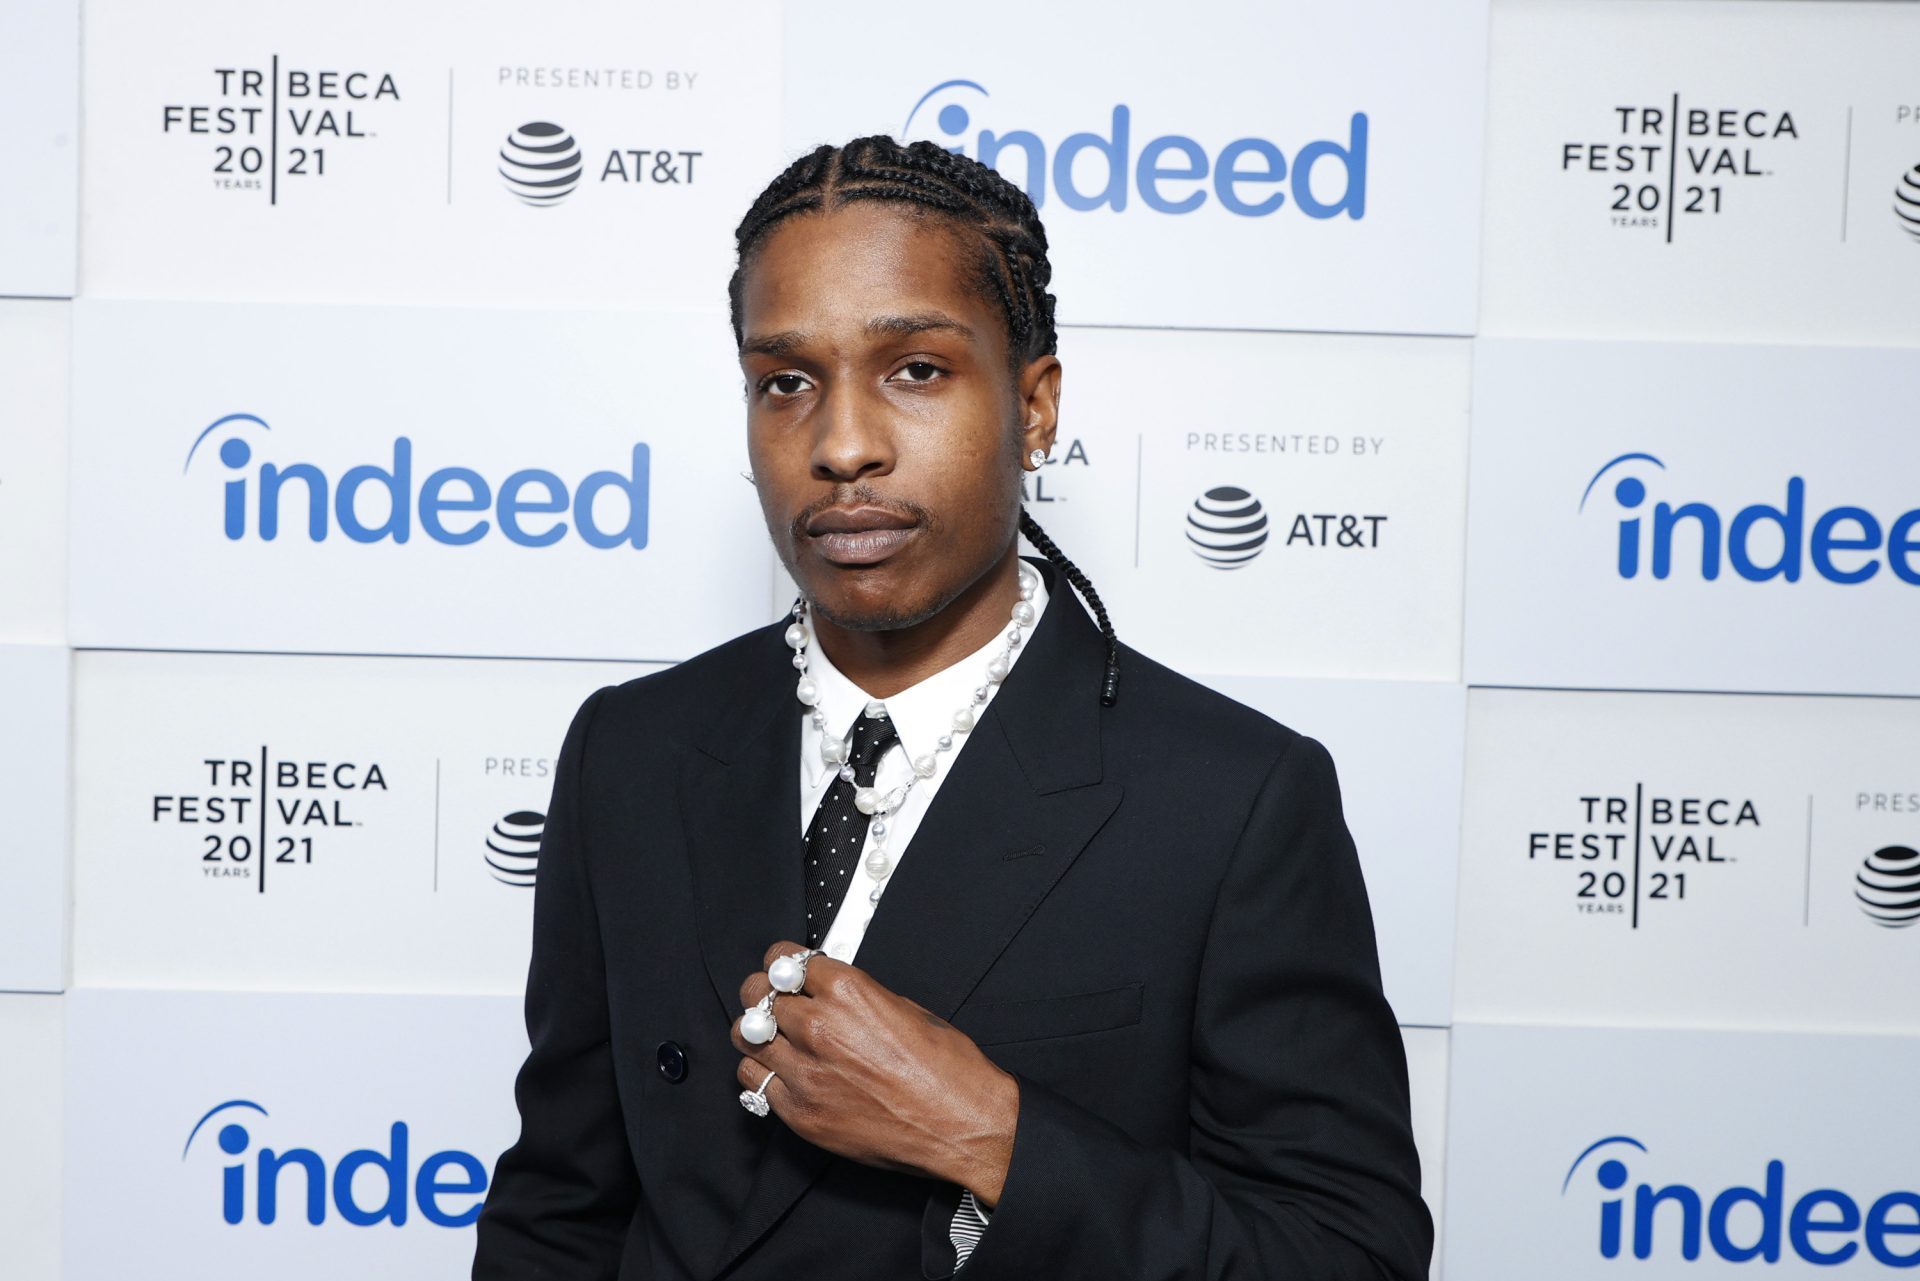 LAPD Sources Claim There's Video Of 2021 Shooting That Led To ASAP Rocky's Recent Arrest